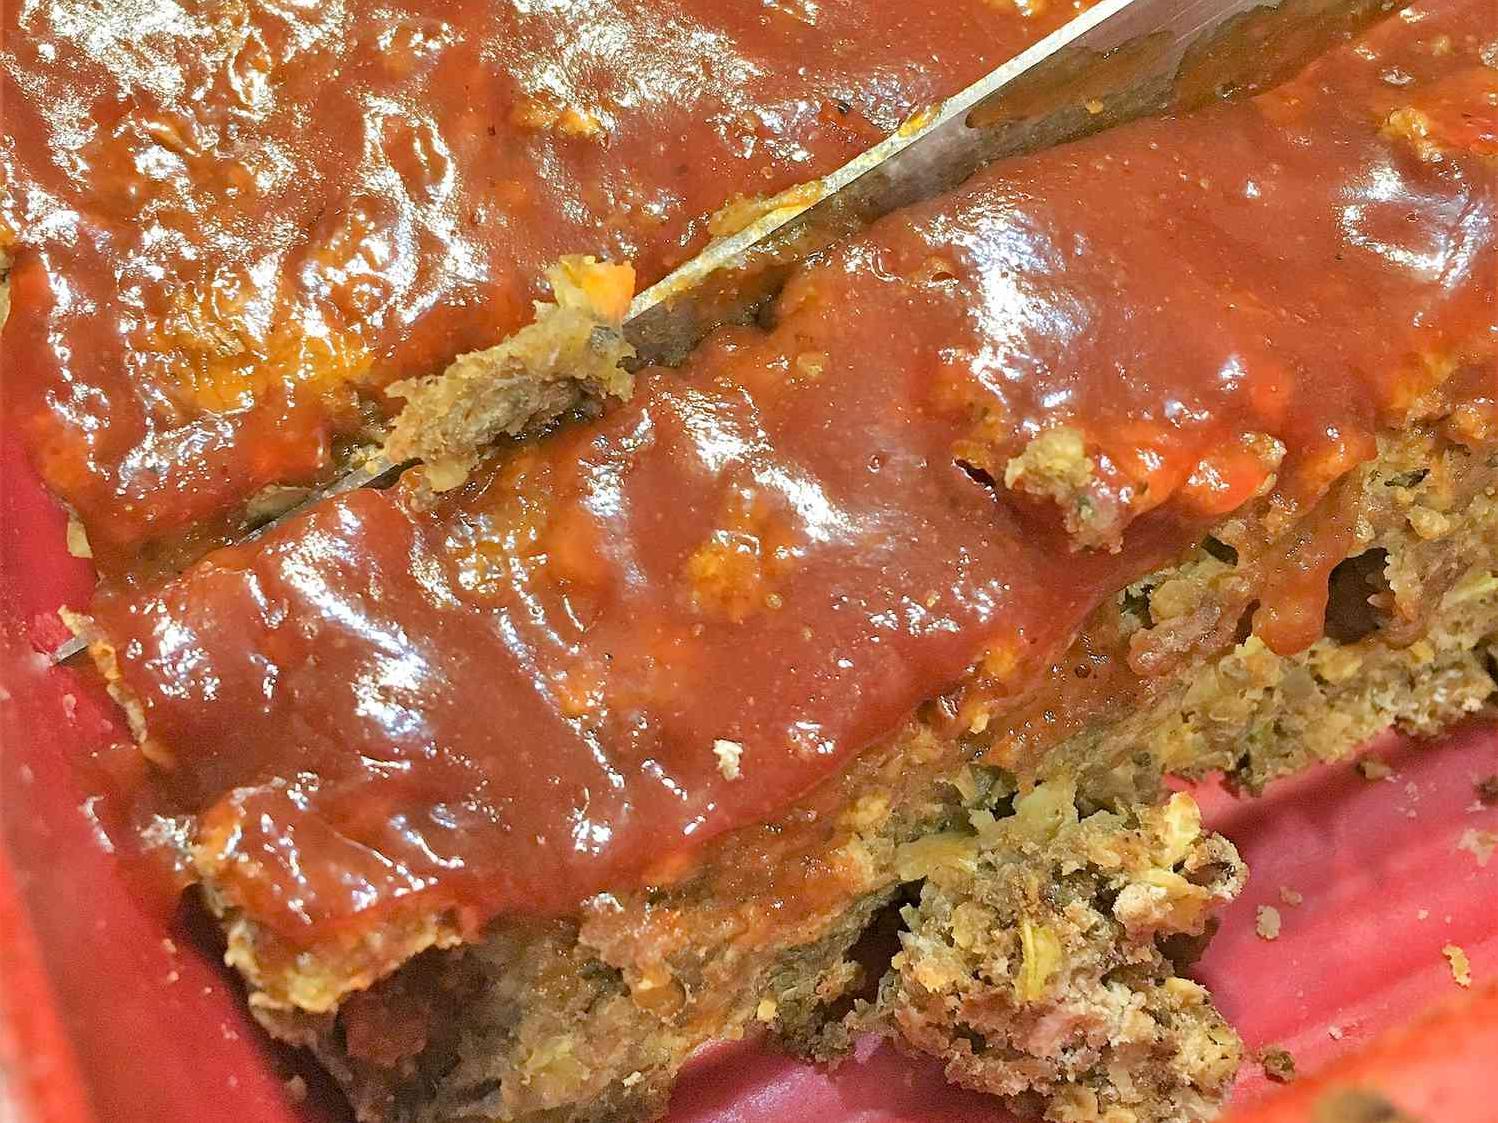  Every bite of this lentil loaf oozes Asian-inspired goodness.